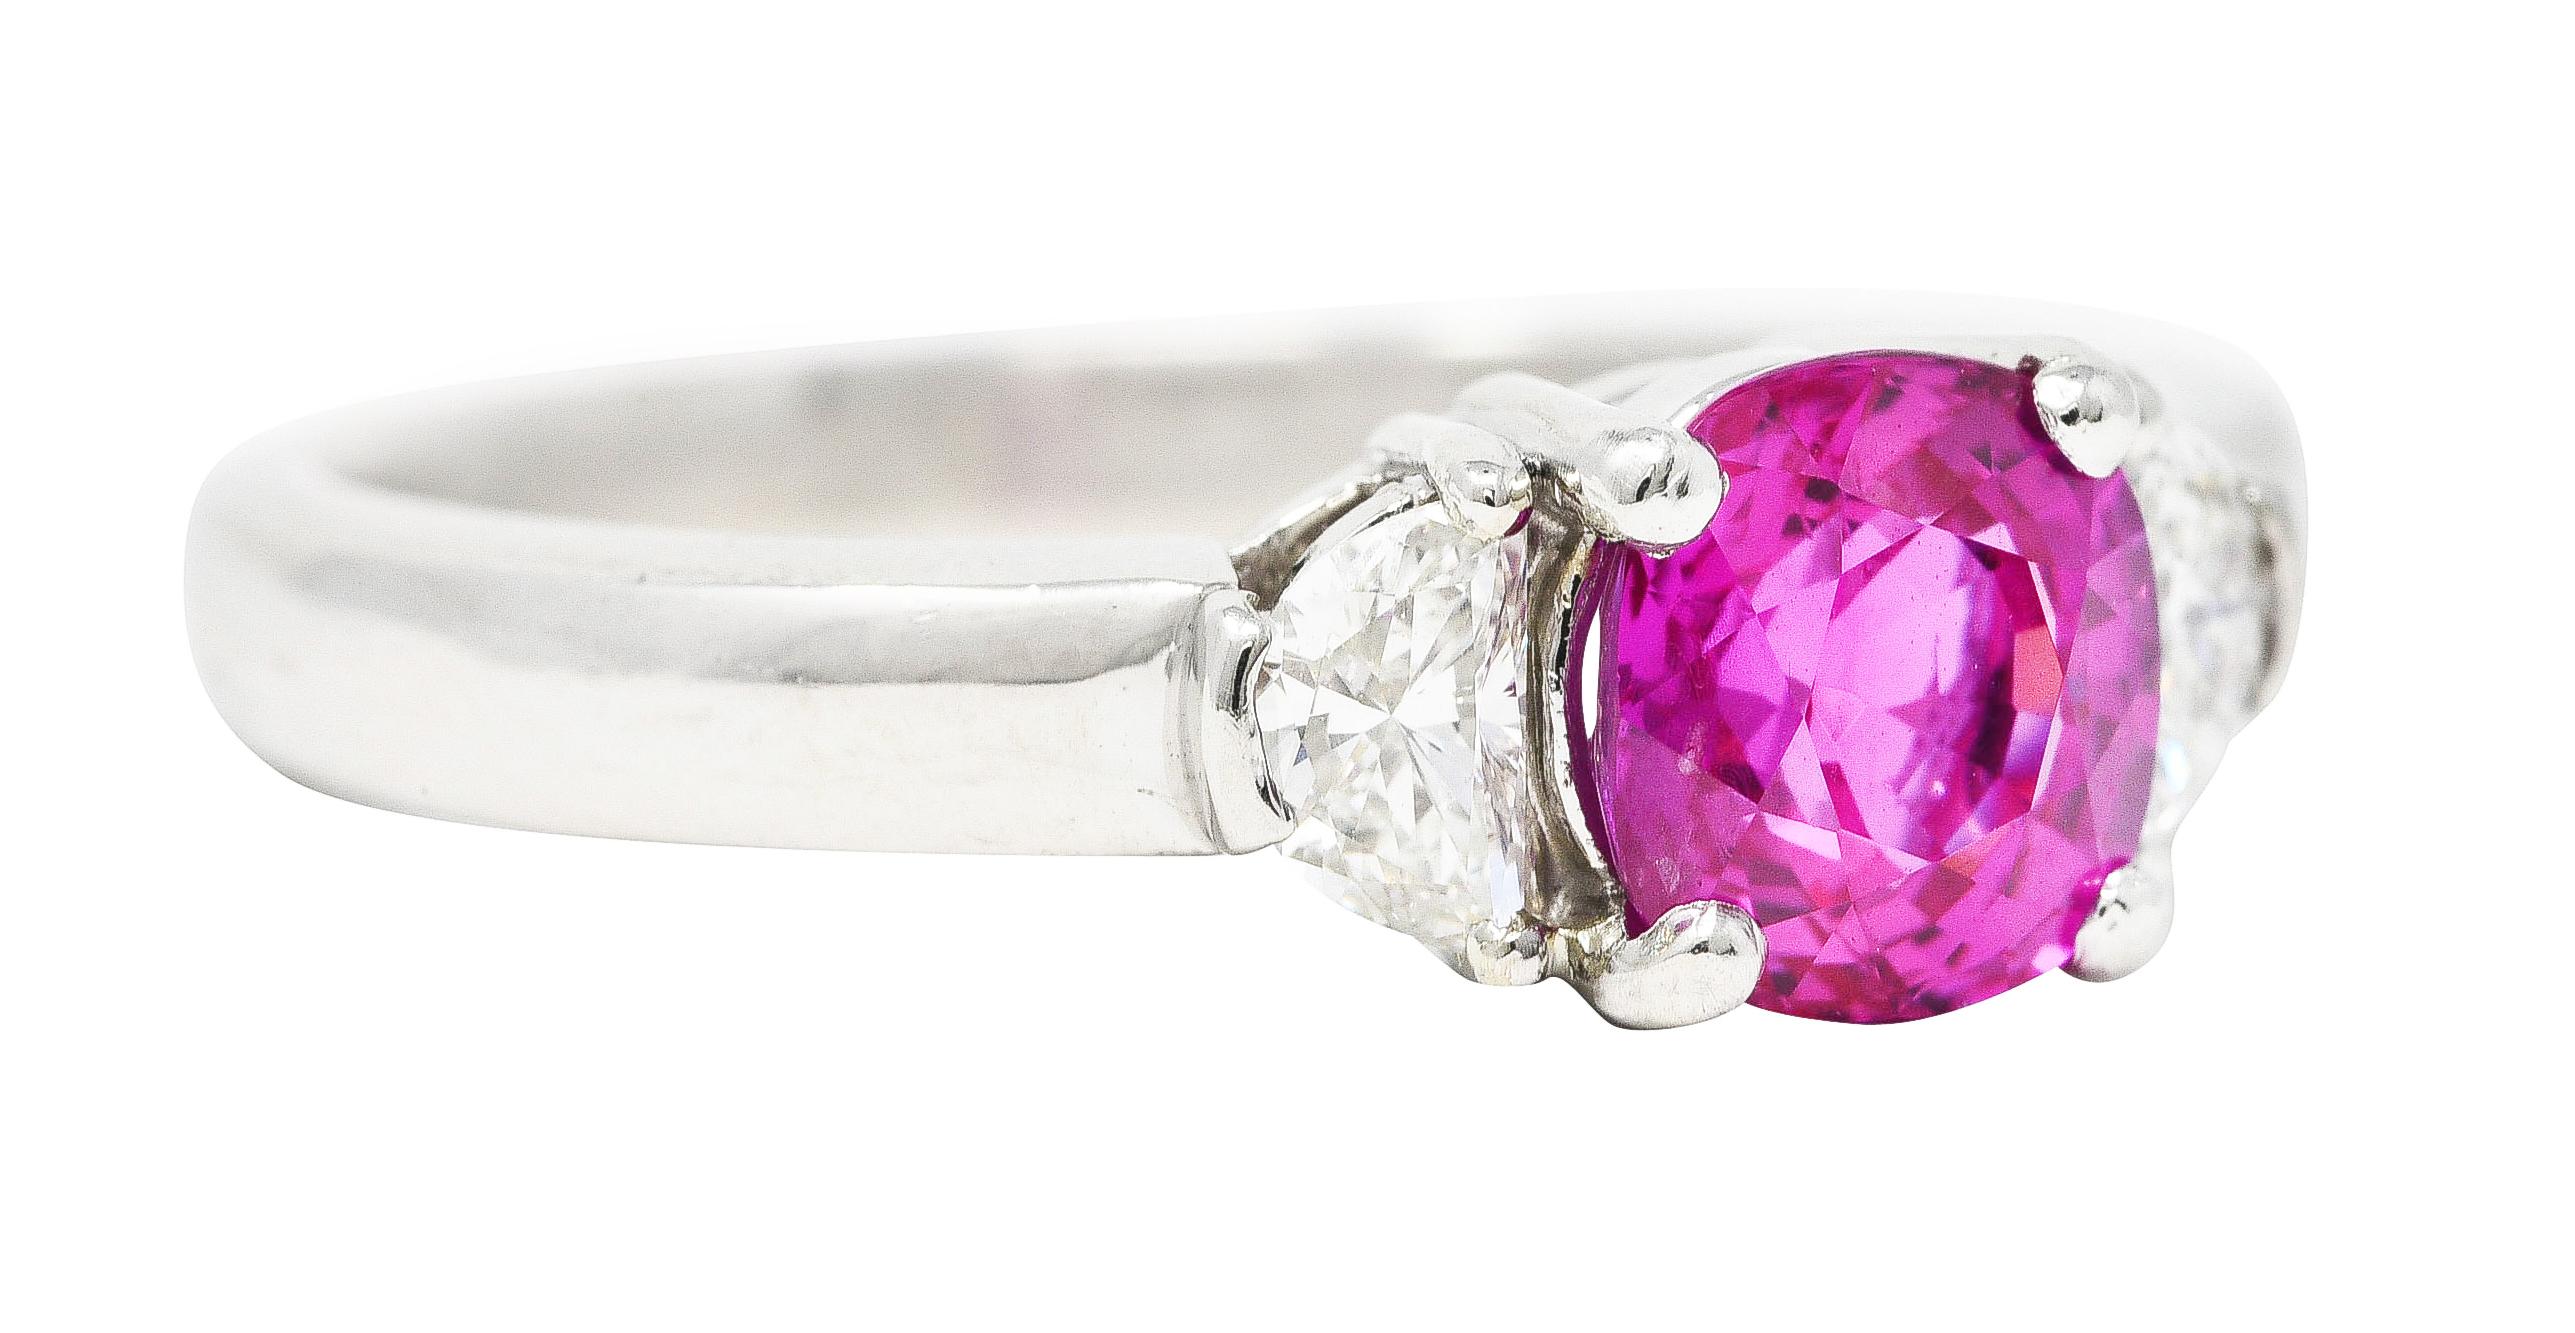 Featuring a cushion cut sapphire weighing approximately 1.53 carats. Transparent, vividly pink in color, with uniformly medium saturation. Basket set and flanked by half-moon cut diamonds. Weighing collectively approximately 0.25 carat - G/H color